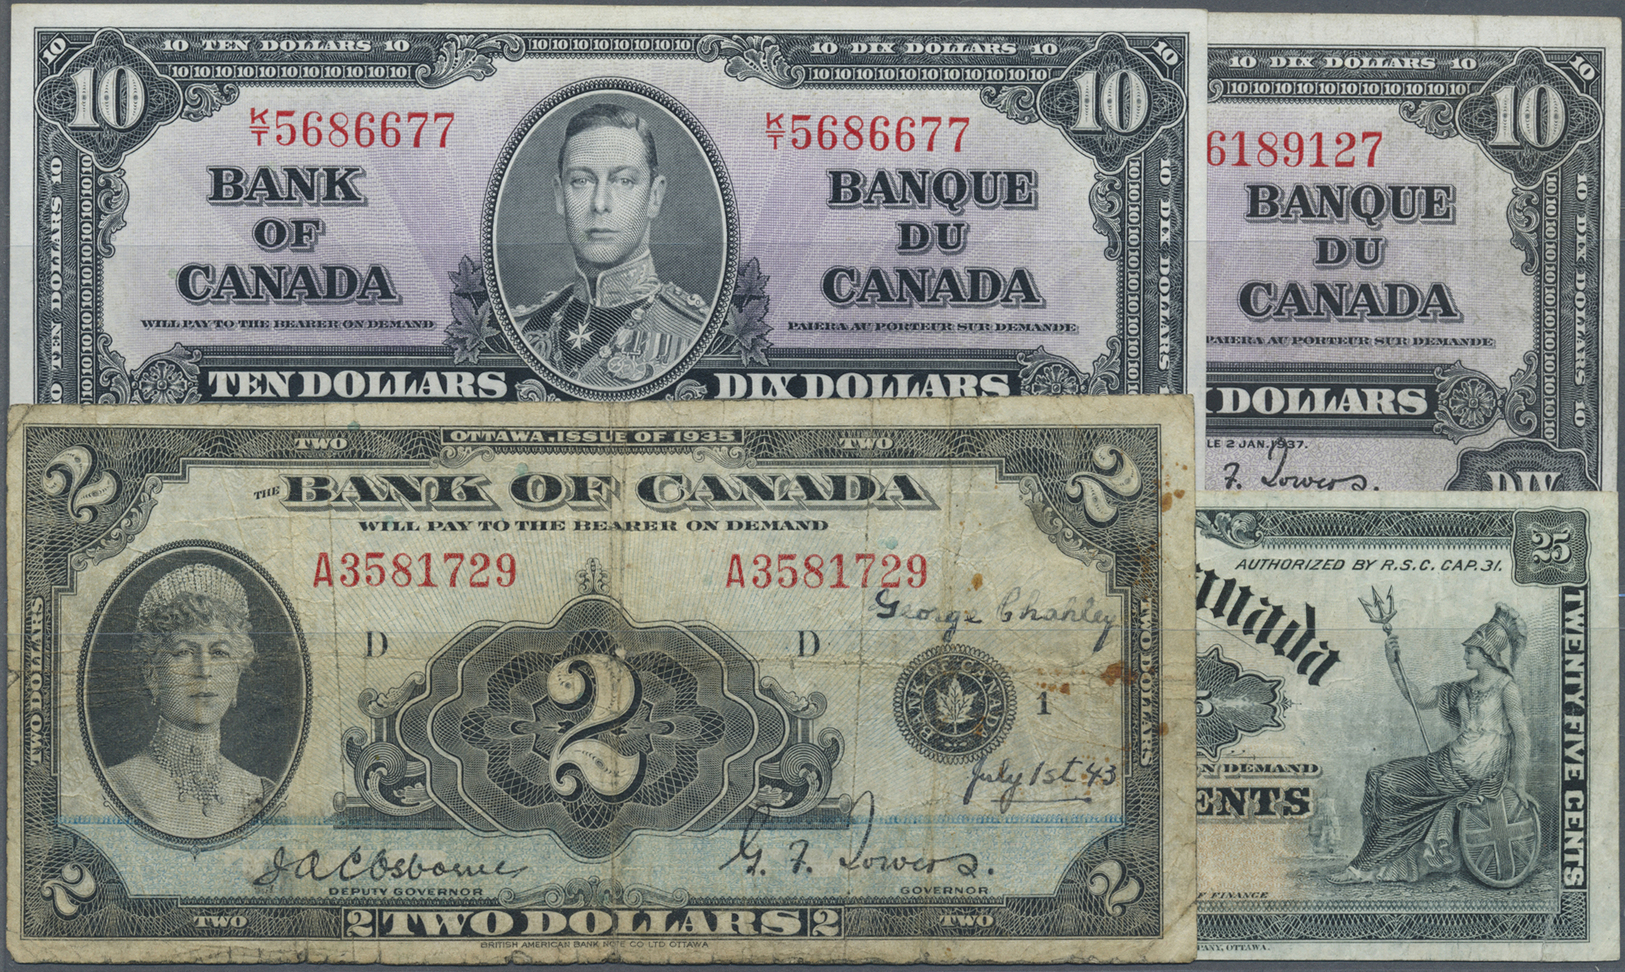 00467 Canada: Set Of 4 Notes Containing Dominion Of Canada 25 Cents P. 9 (F), 2 Dollars ND P. 40 (VG) And 2x 10 Dollars - Canada